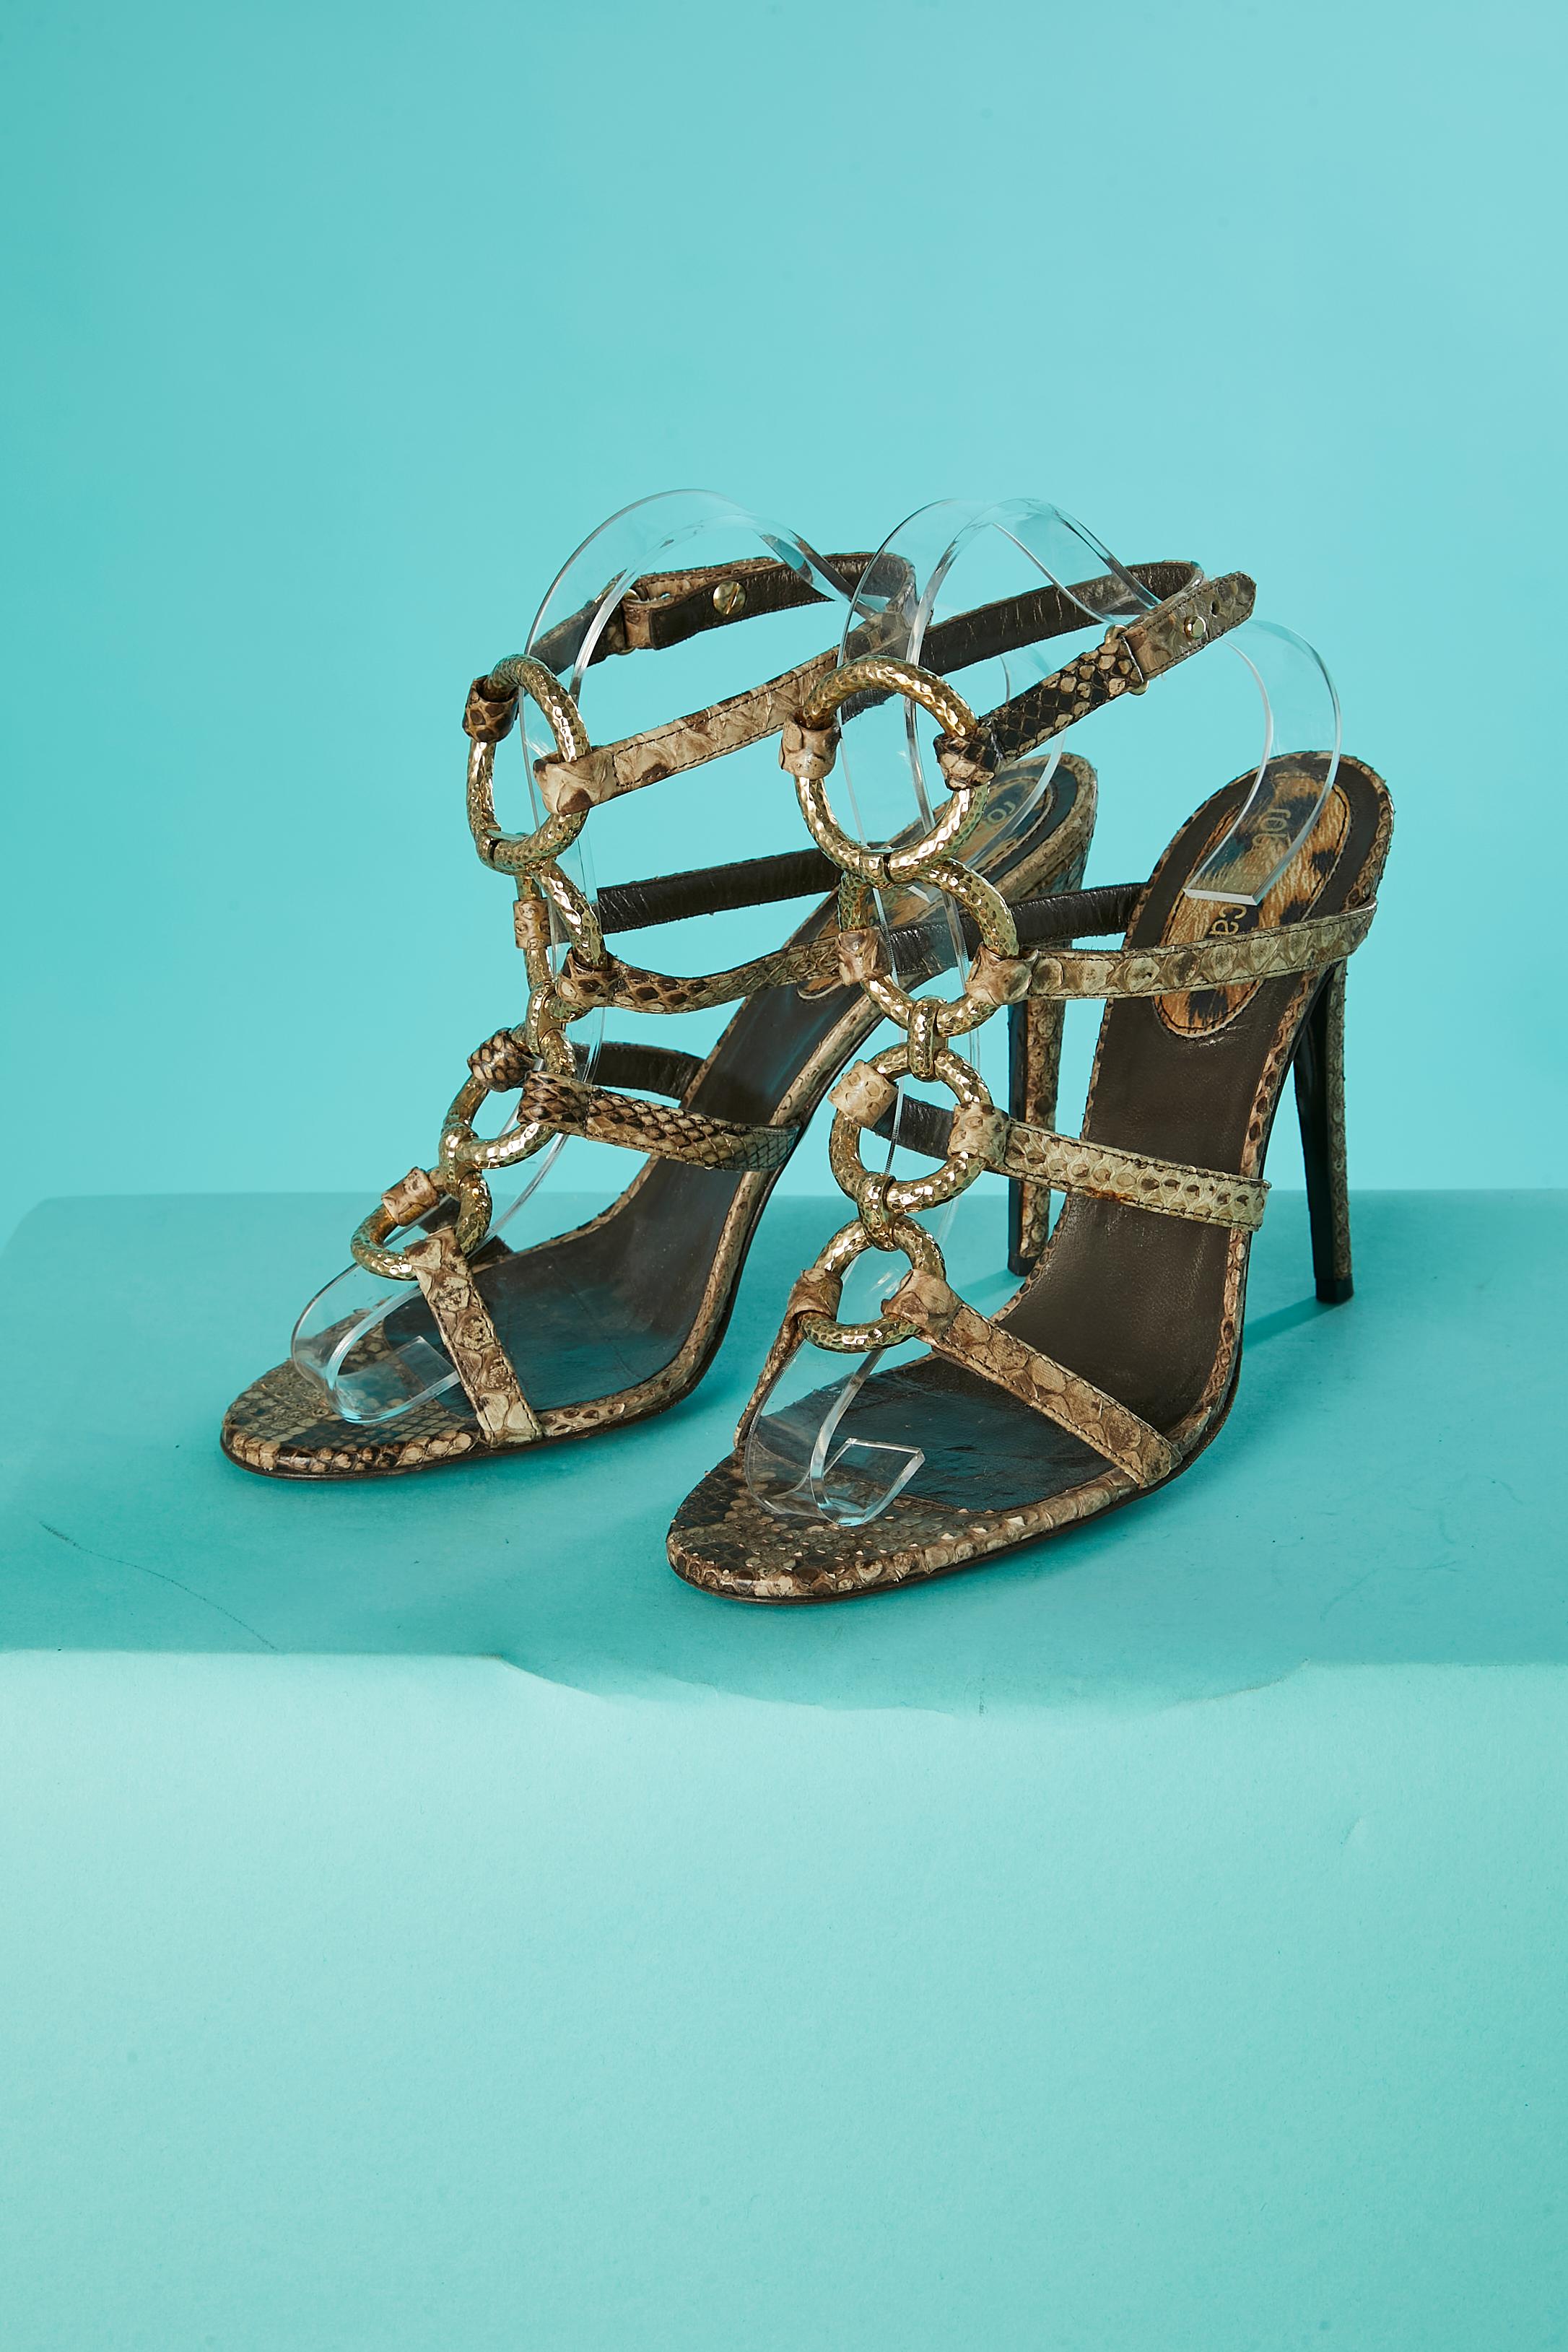 High heels sandals in leather and gold metallic rings .
Heel's height : 12 cm
Plateform : 0,5 cm 
SHOE SIZE : 40 ( Eu) 8 (Us) 
